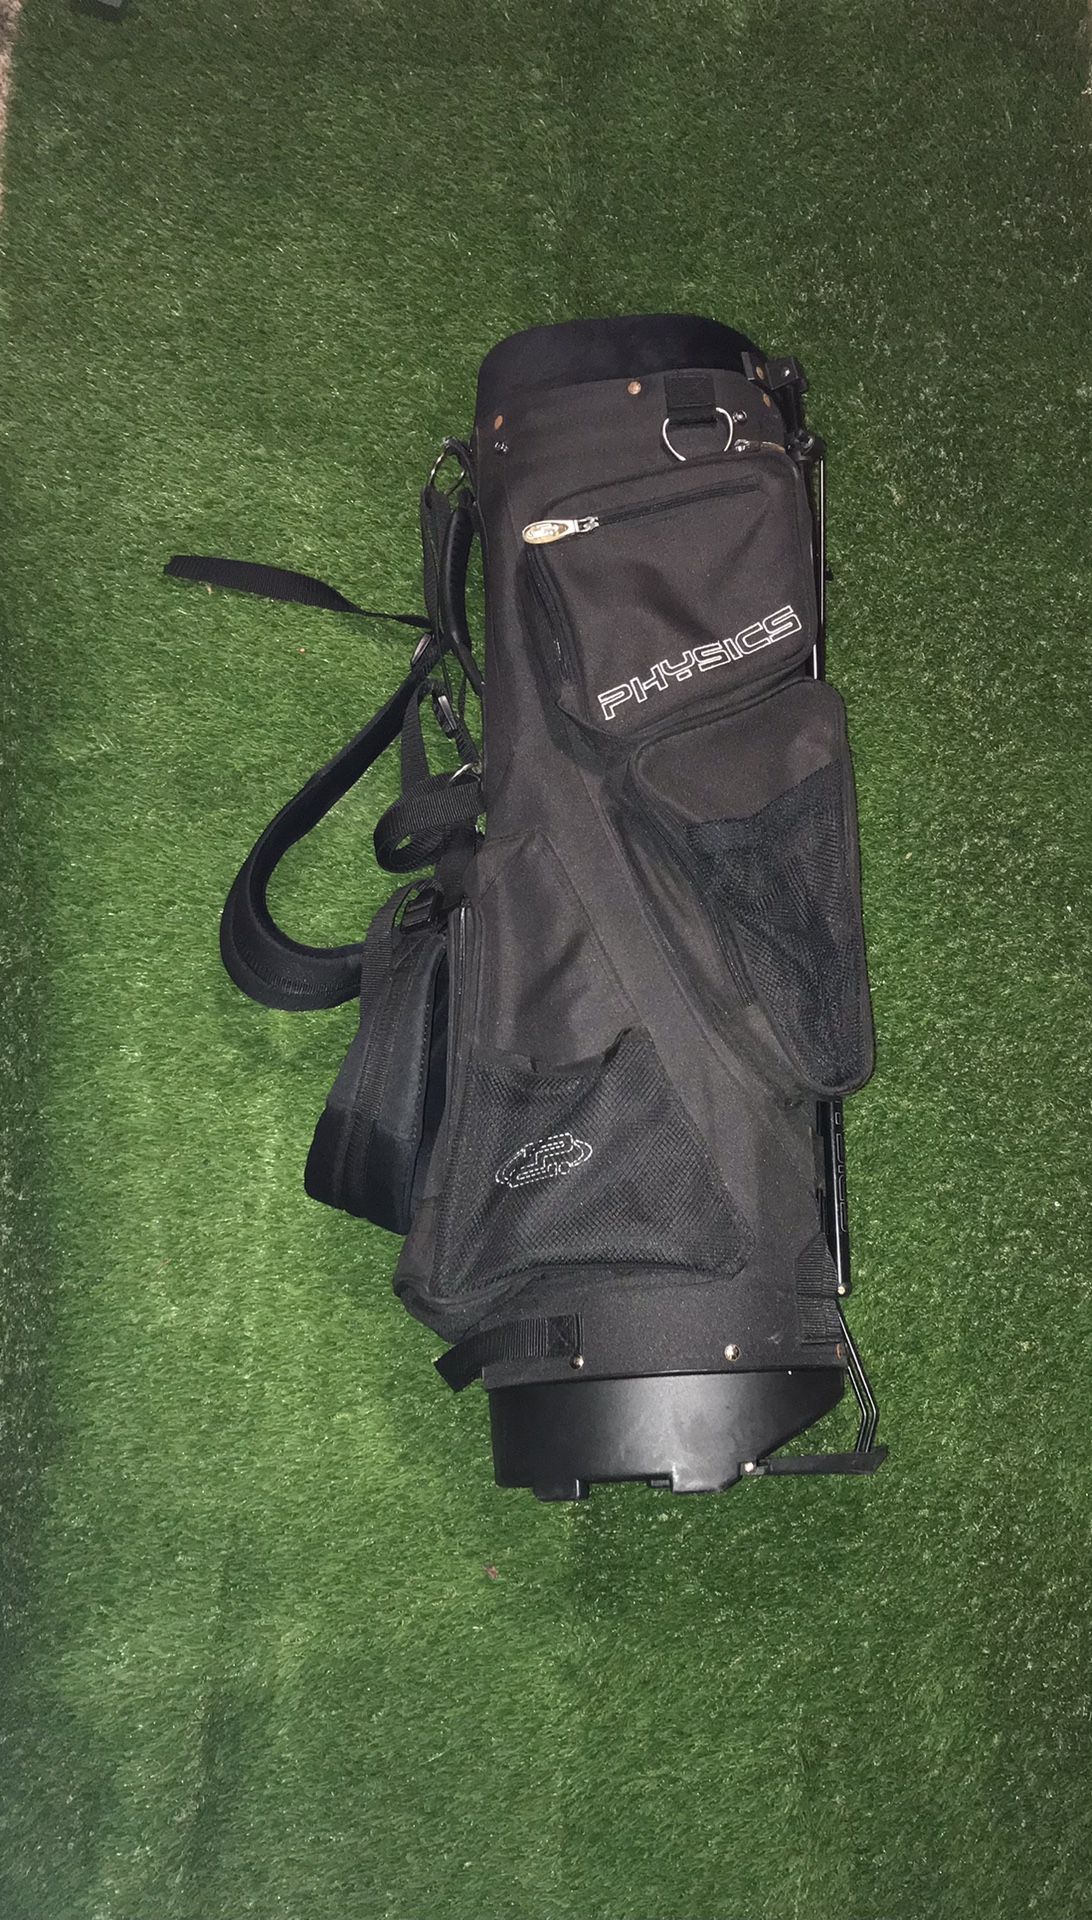 Physics Stand Golf Bag Pre-owned